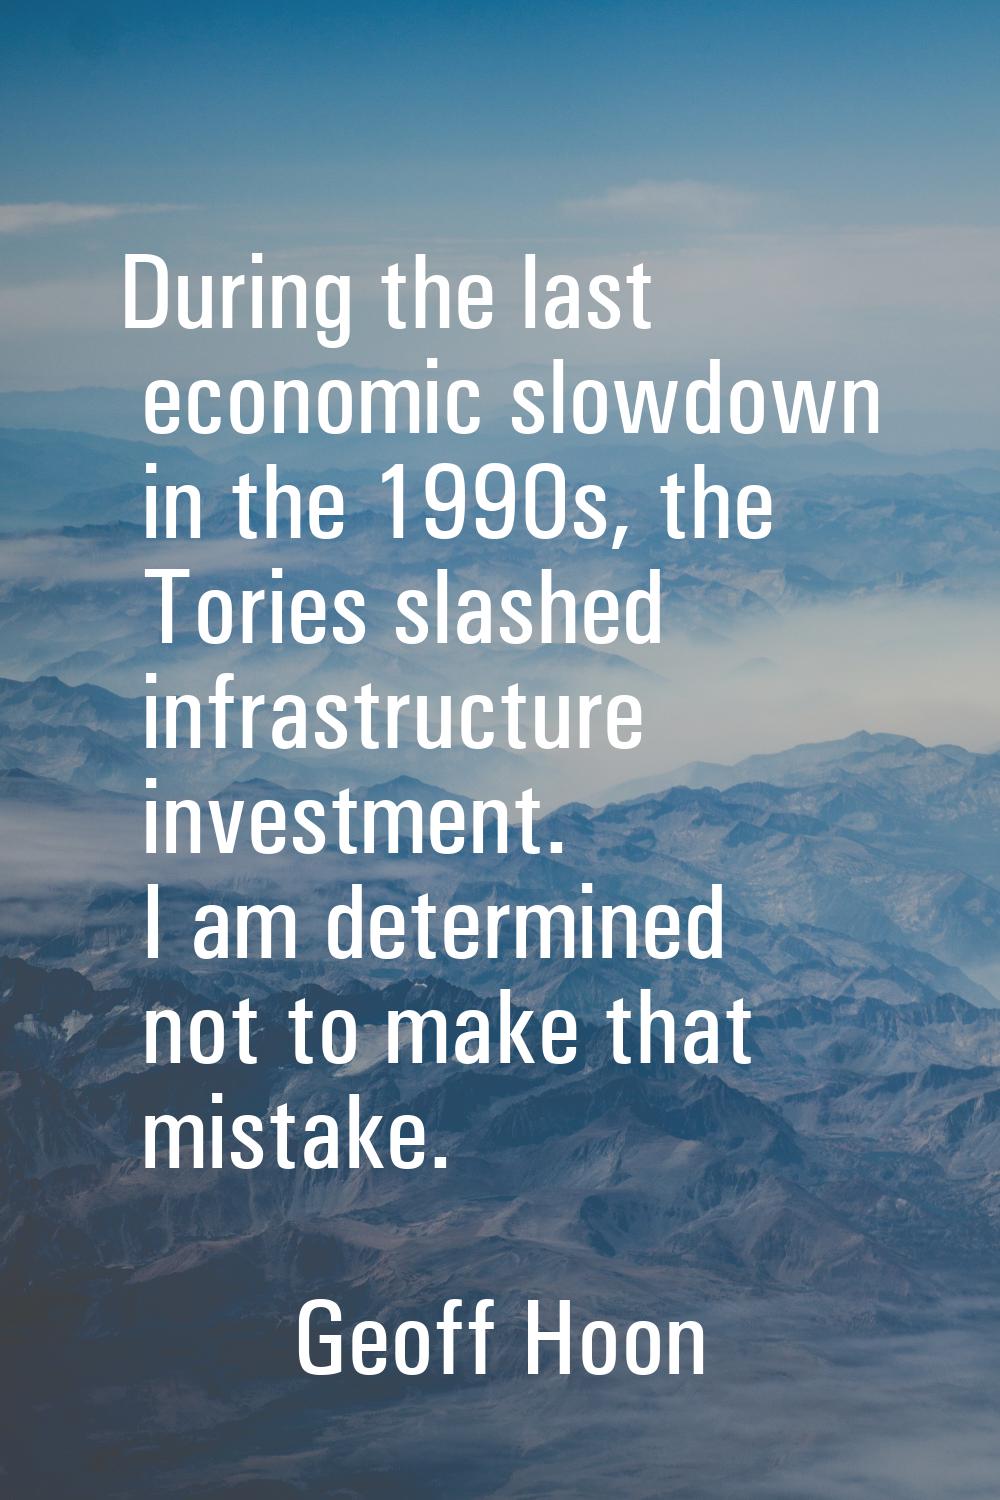 During the last economic slowdown in the 1990s, the Tories slashed infrastructure investment. I am 